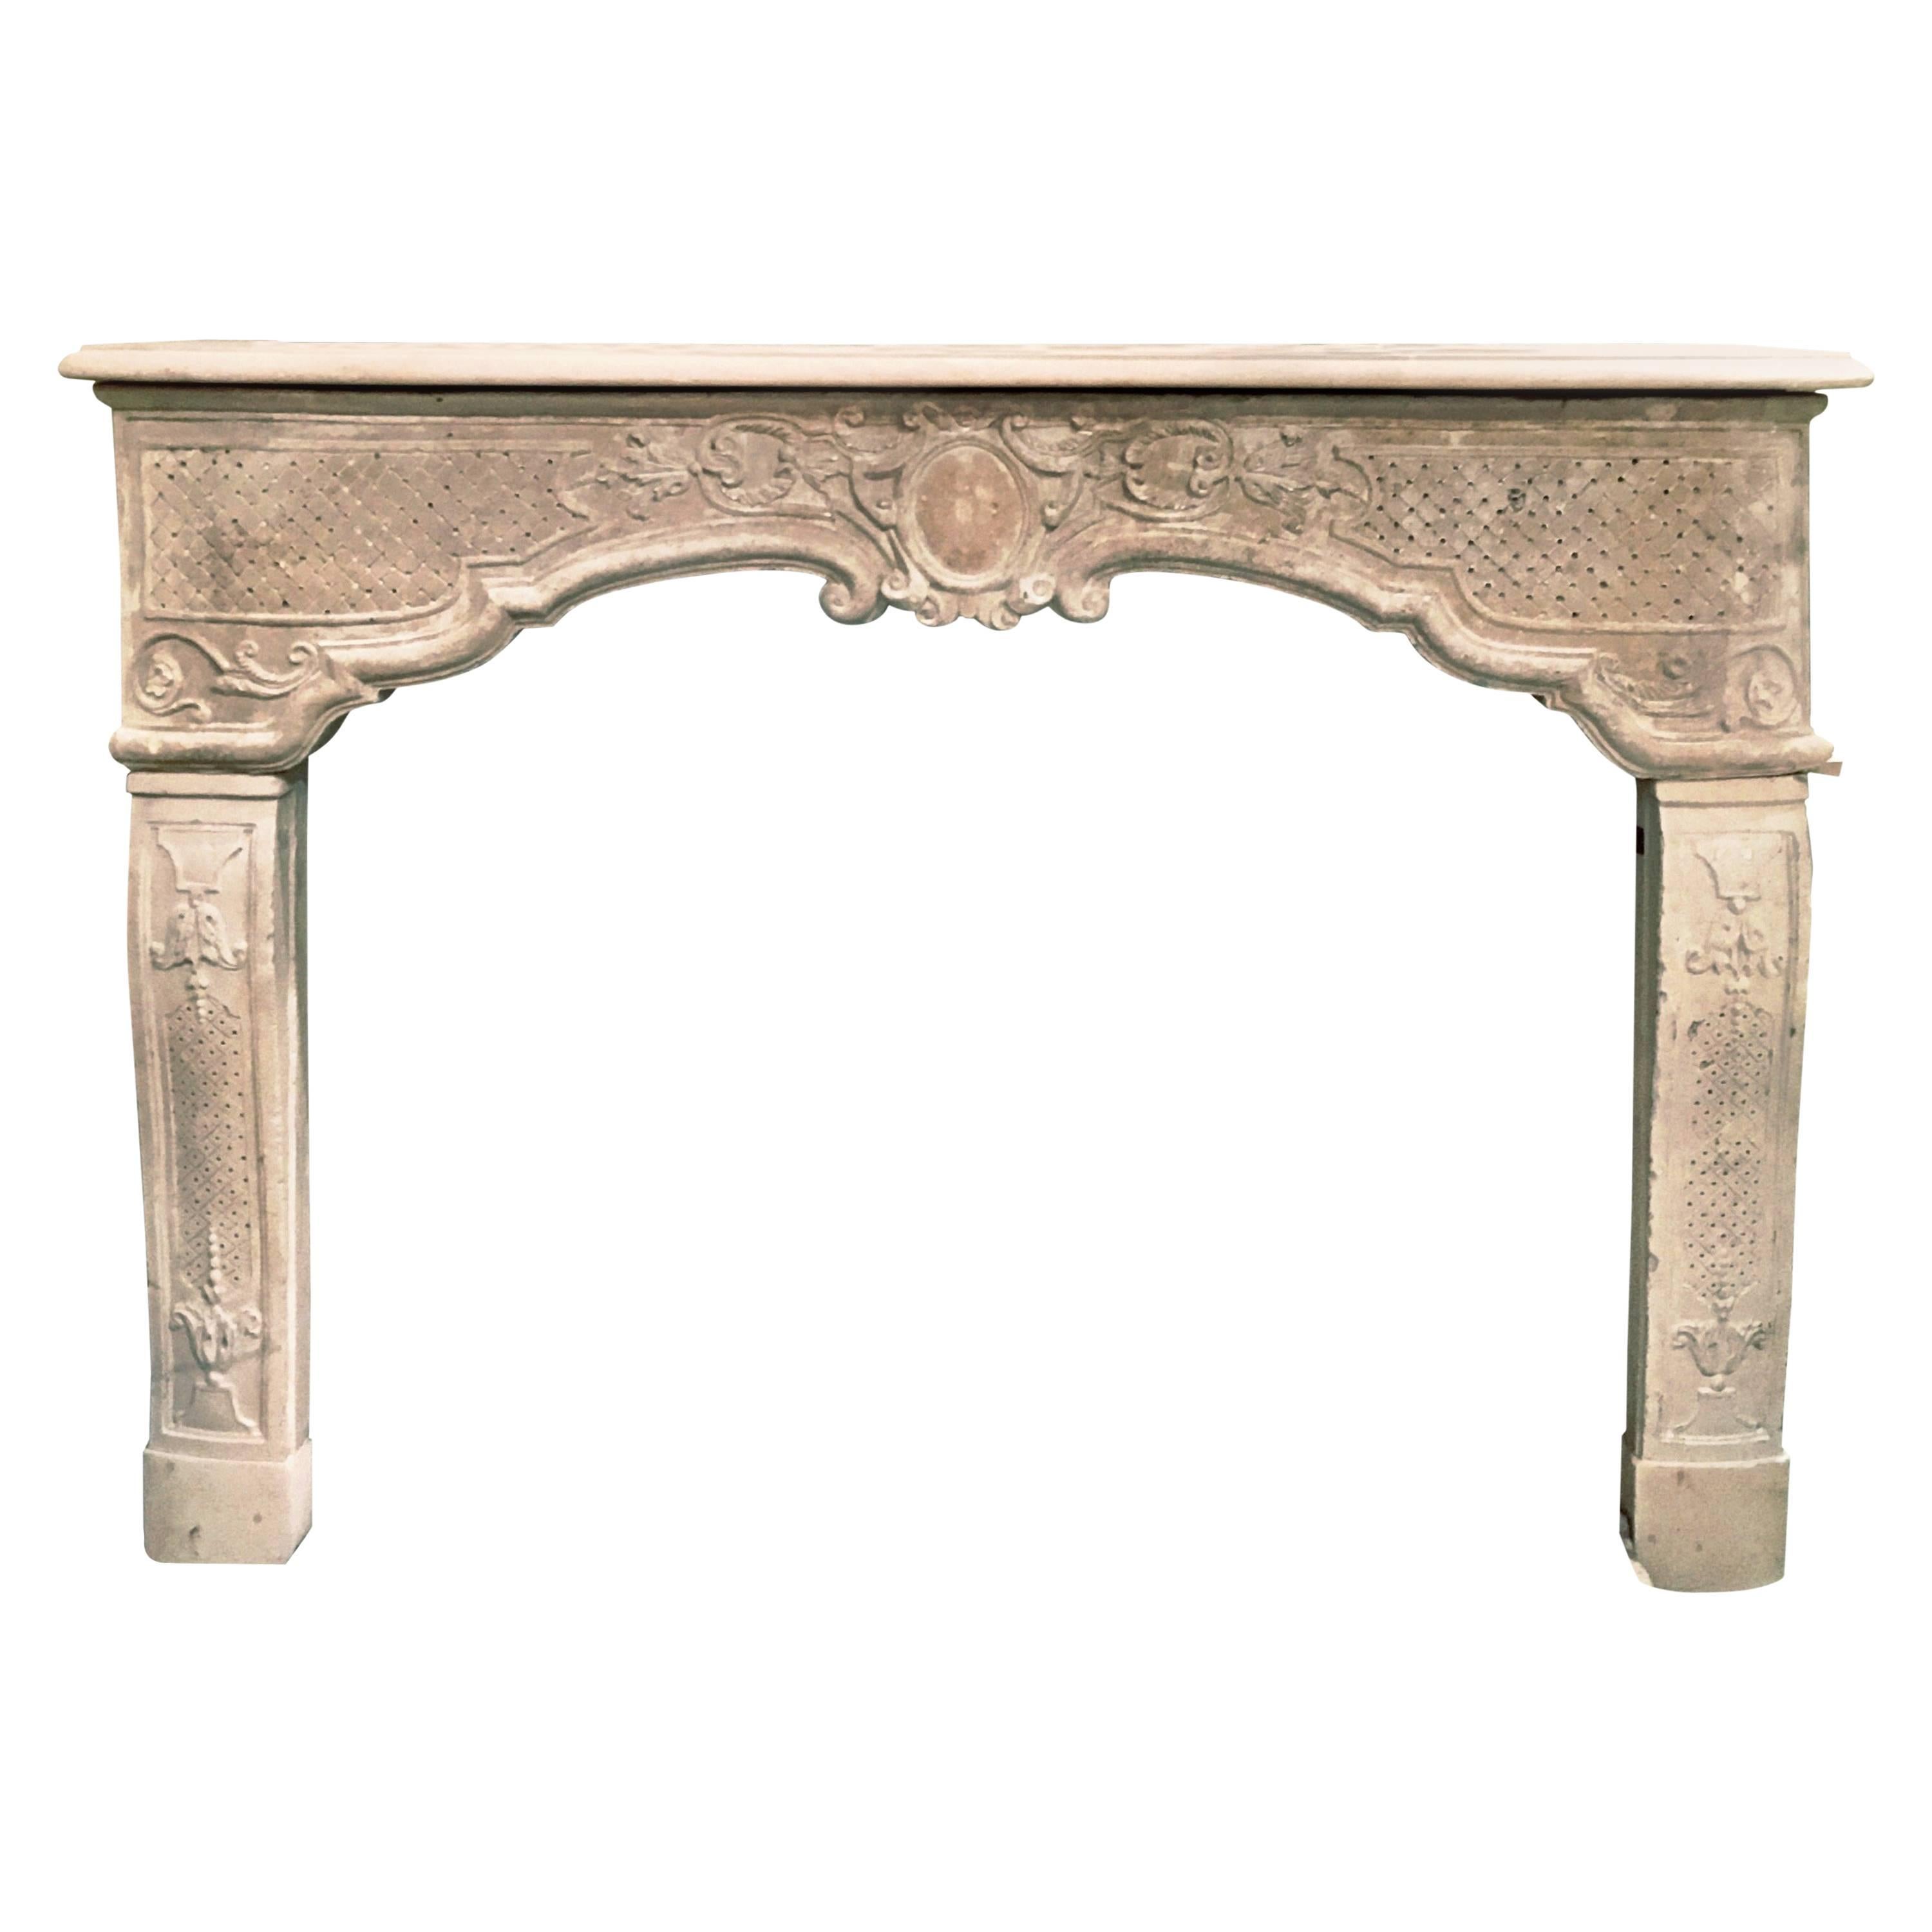 Beautiful 18th Century French Mantelpiece with Trumeau